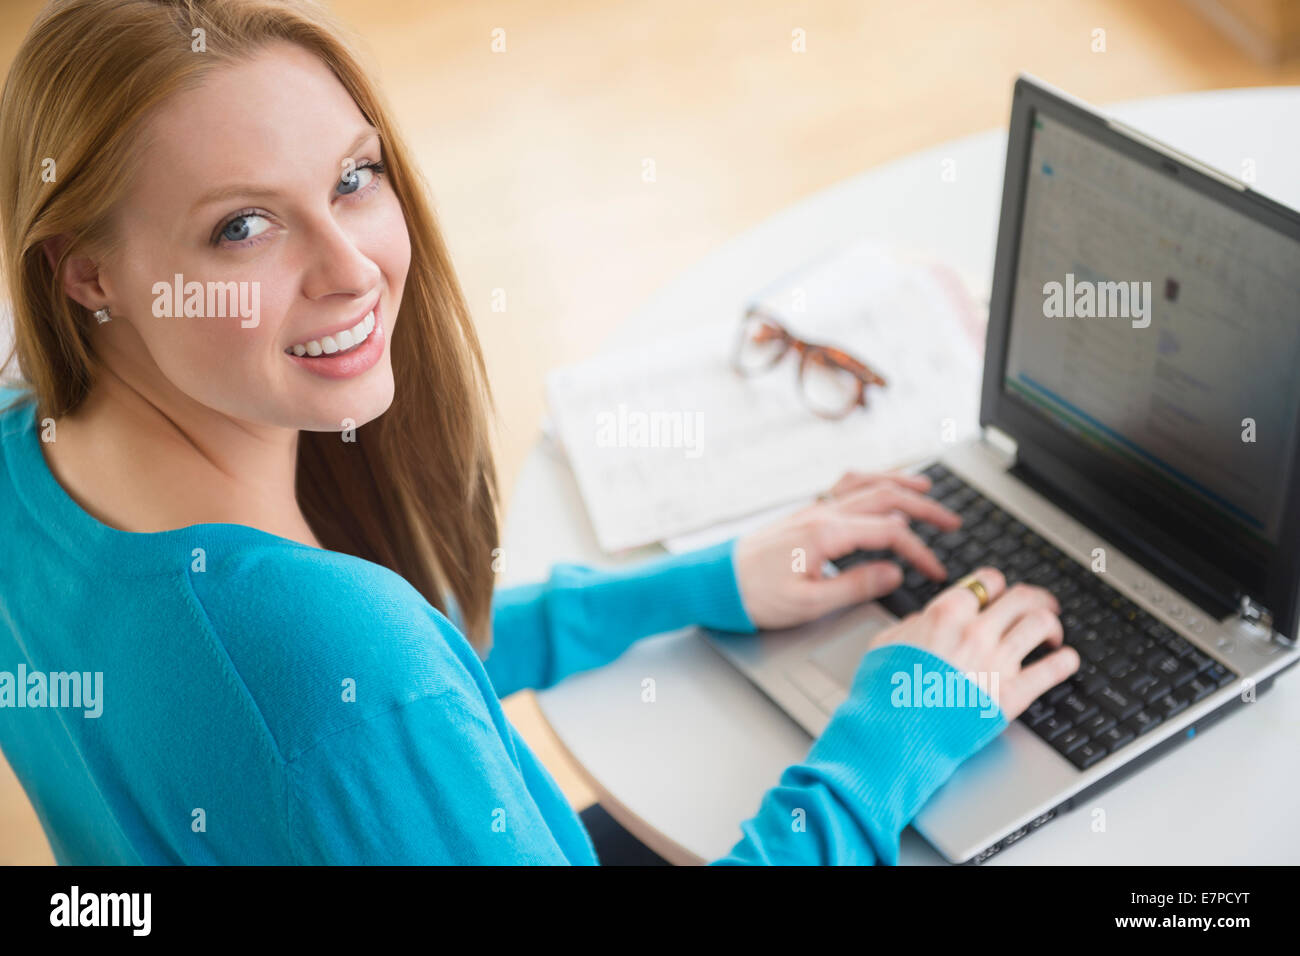 Smiling young woman using laptop Banque D'Images